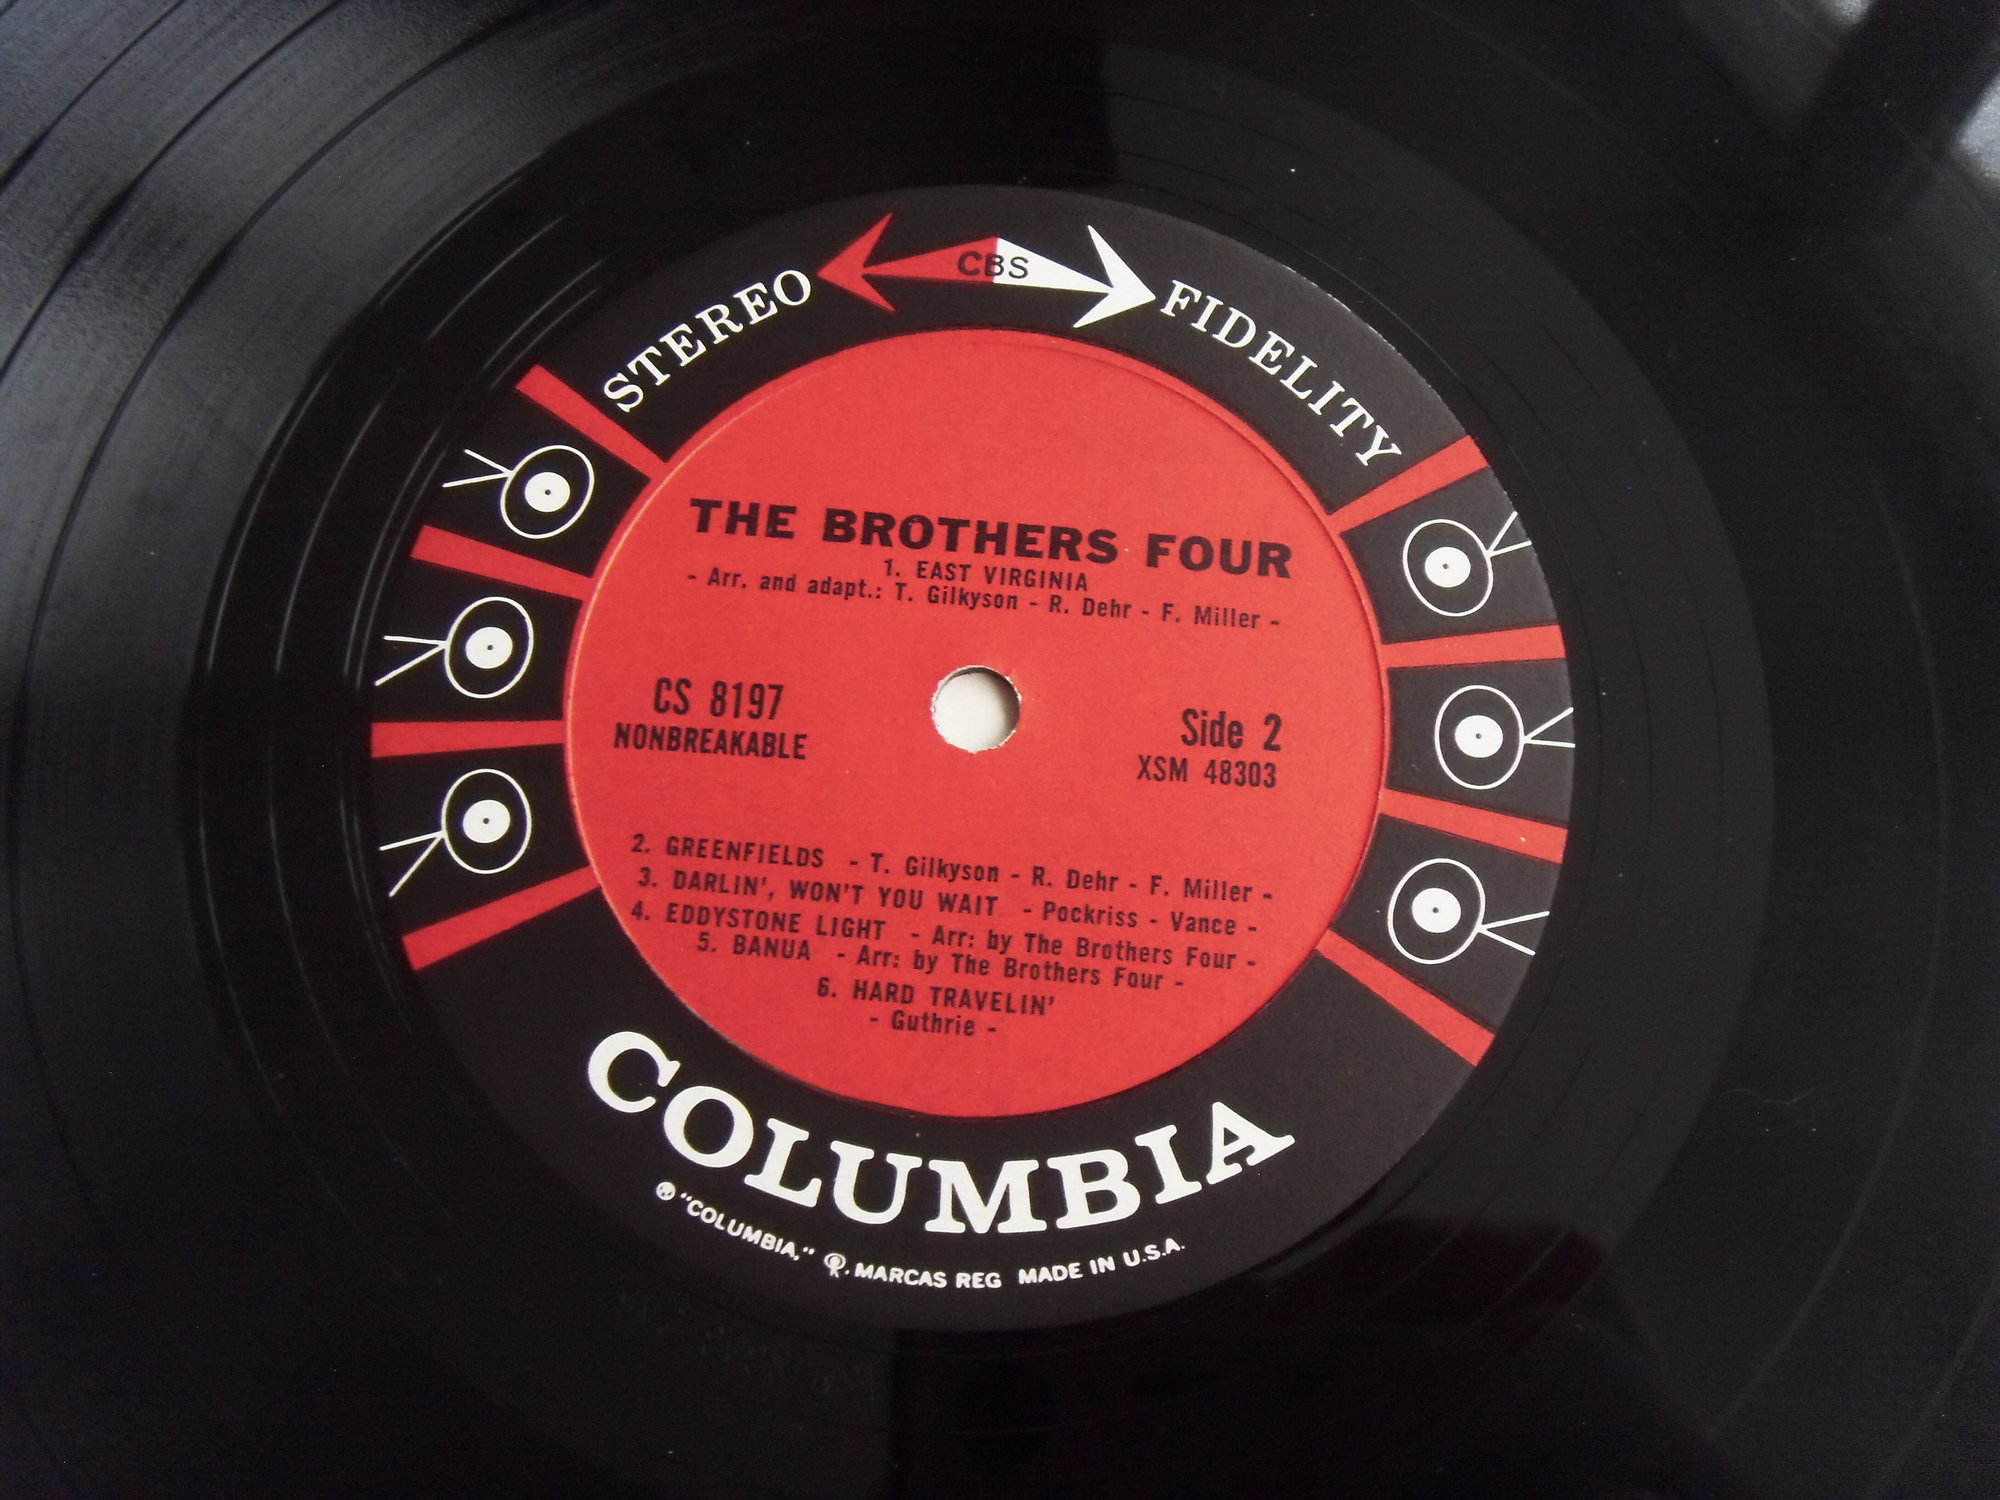 THE BROTHERS FOUR The Brothers Four 4